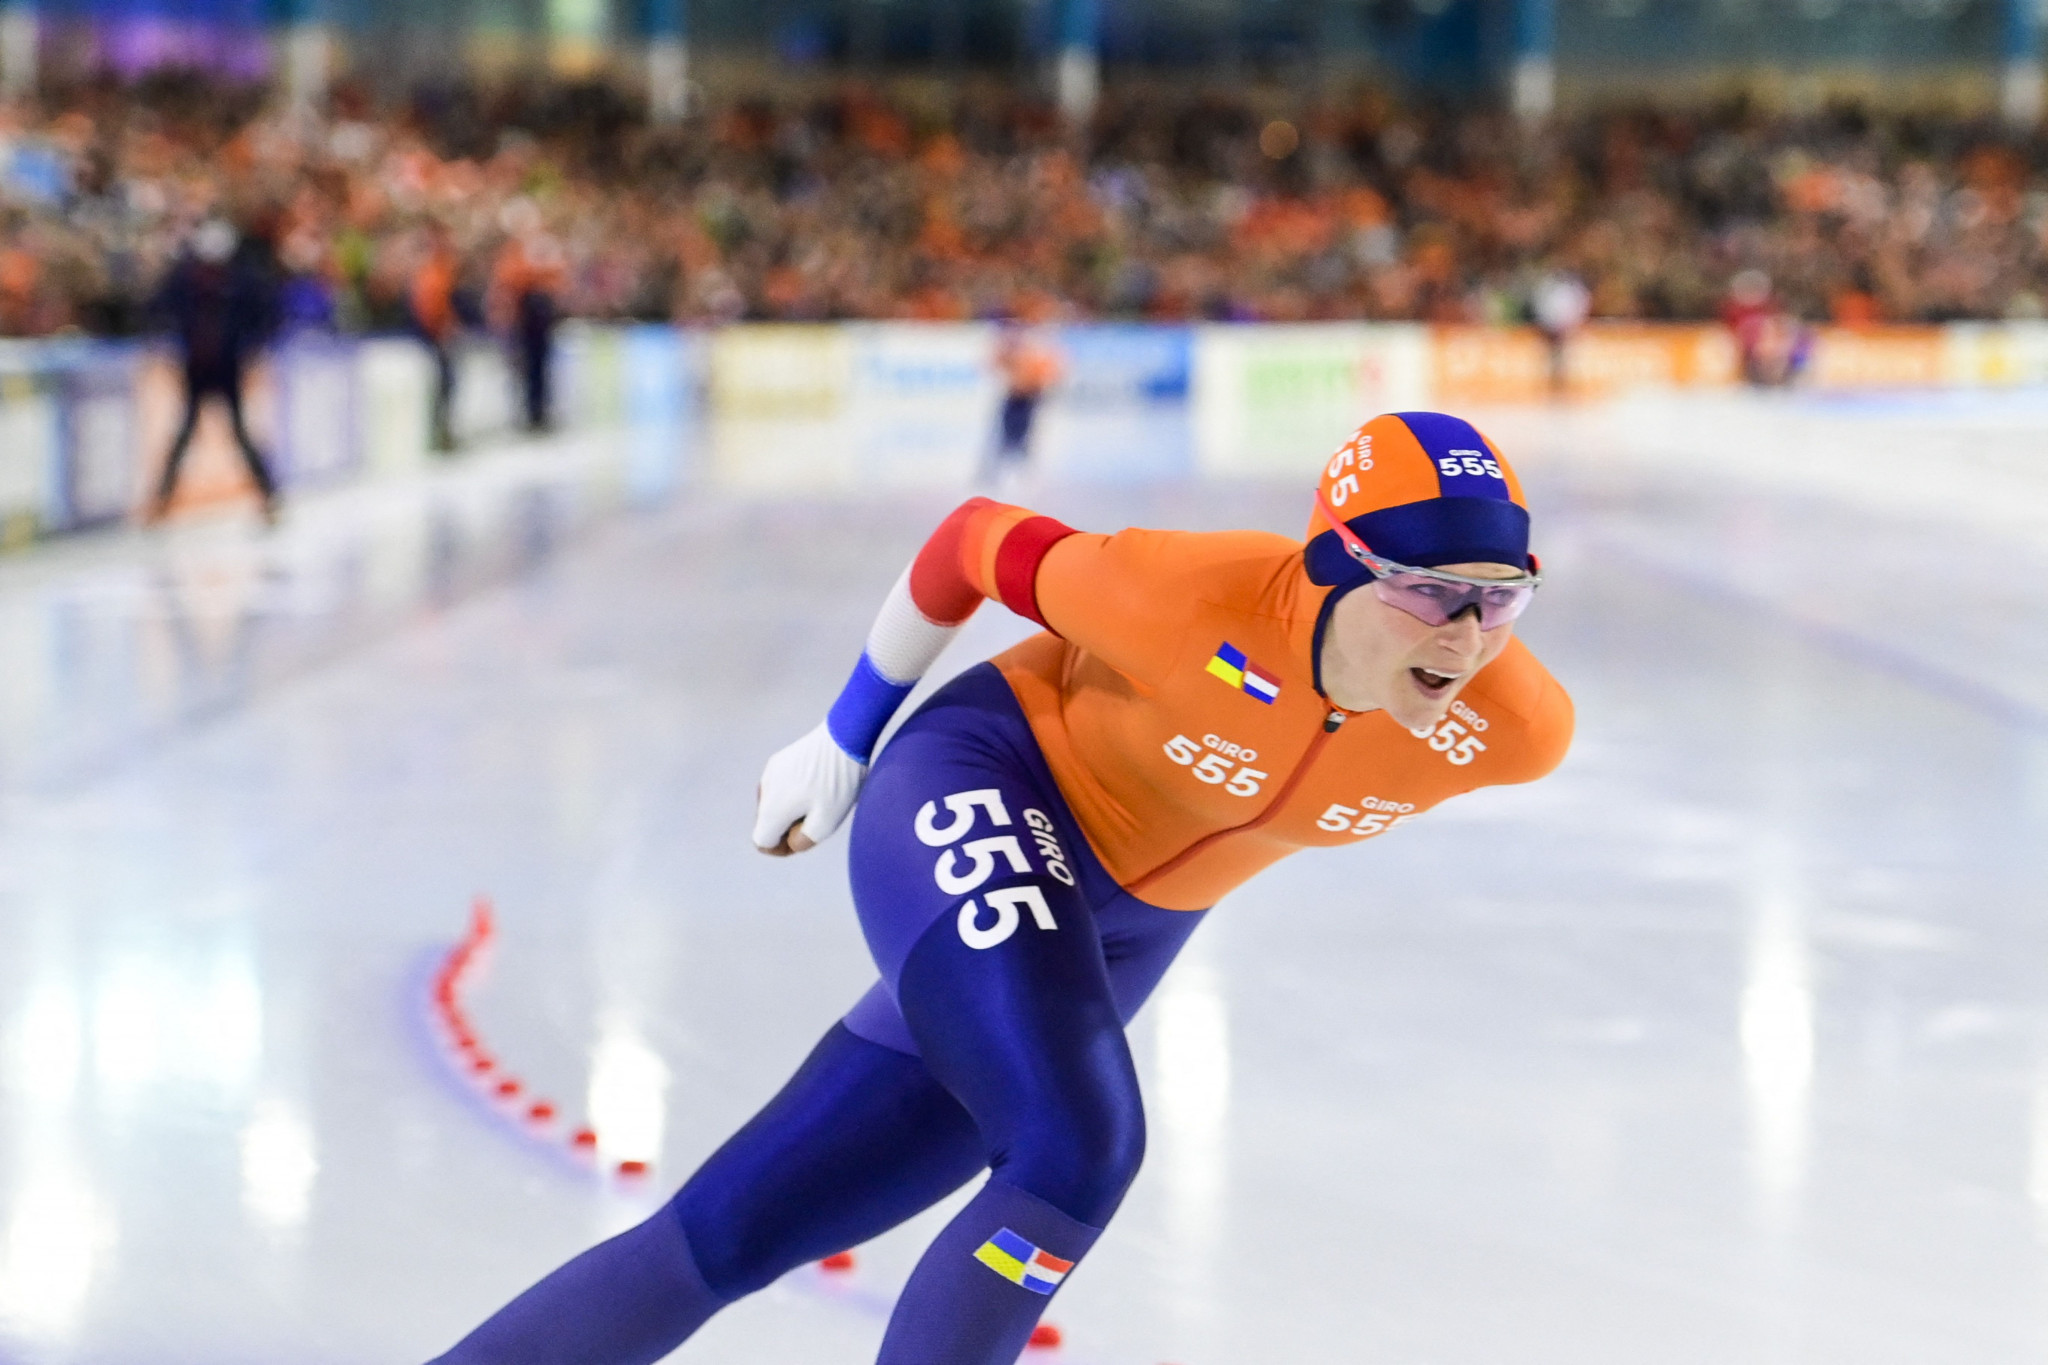 Schouten earns overall distance title before home fans as ISU Speed Skating World Cup Final ends